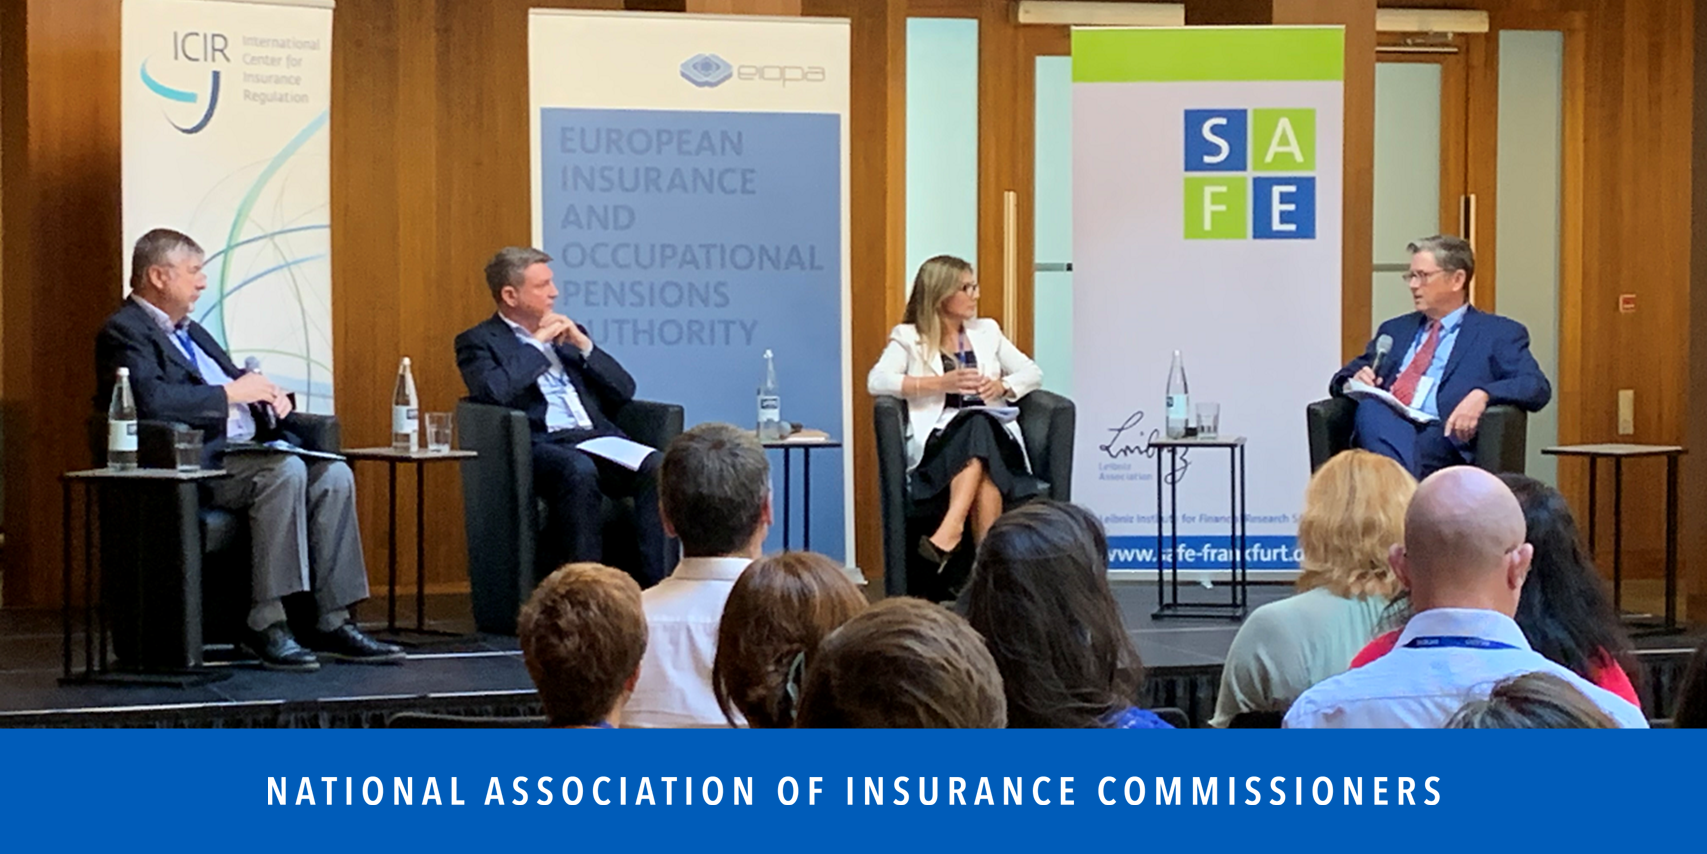 Nebraska Department of Insurance Director Eric Dunning Speaks on a Panel at the European Insurance and Occupational Pensions Authority's 8th Conference on Global Insurance Supervision in Frankfurt, Germany